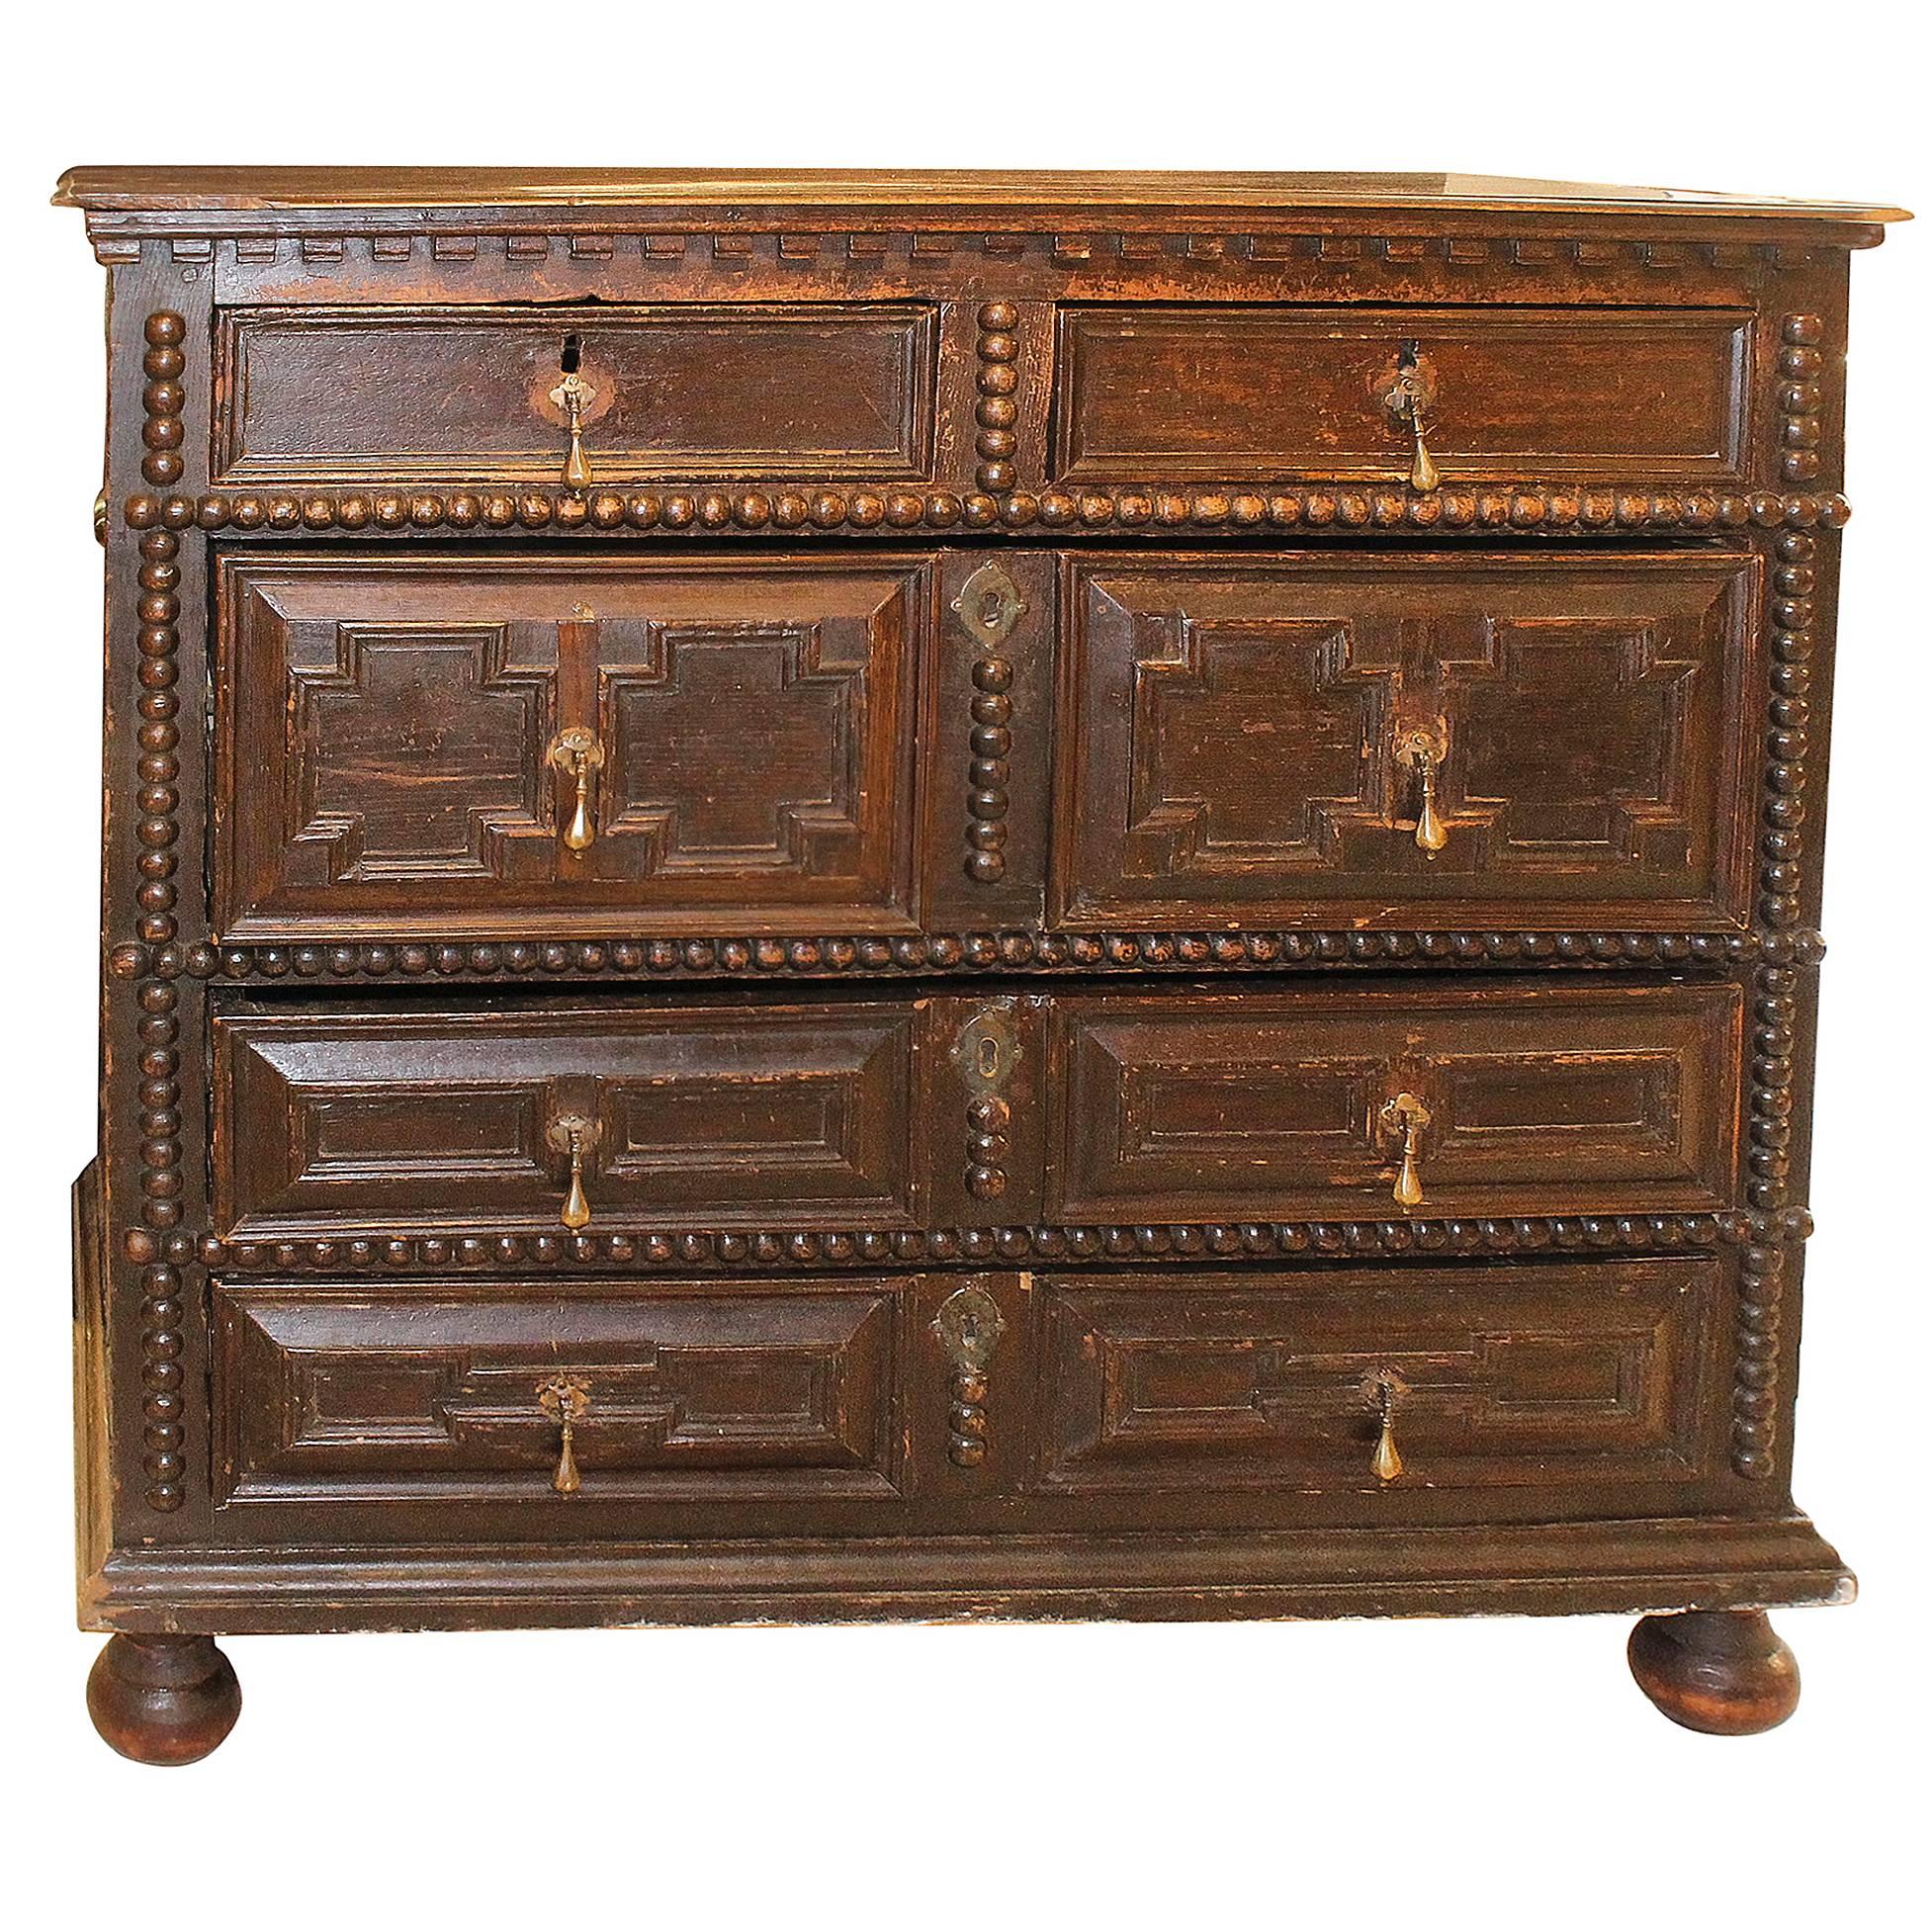 Period 17th-Early 18th Century Pilgrim Chest For Sale